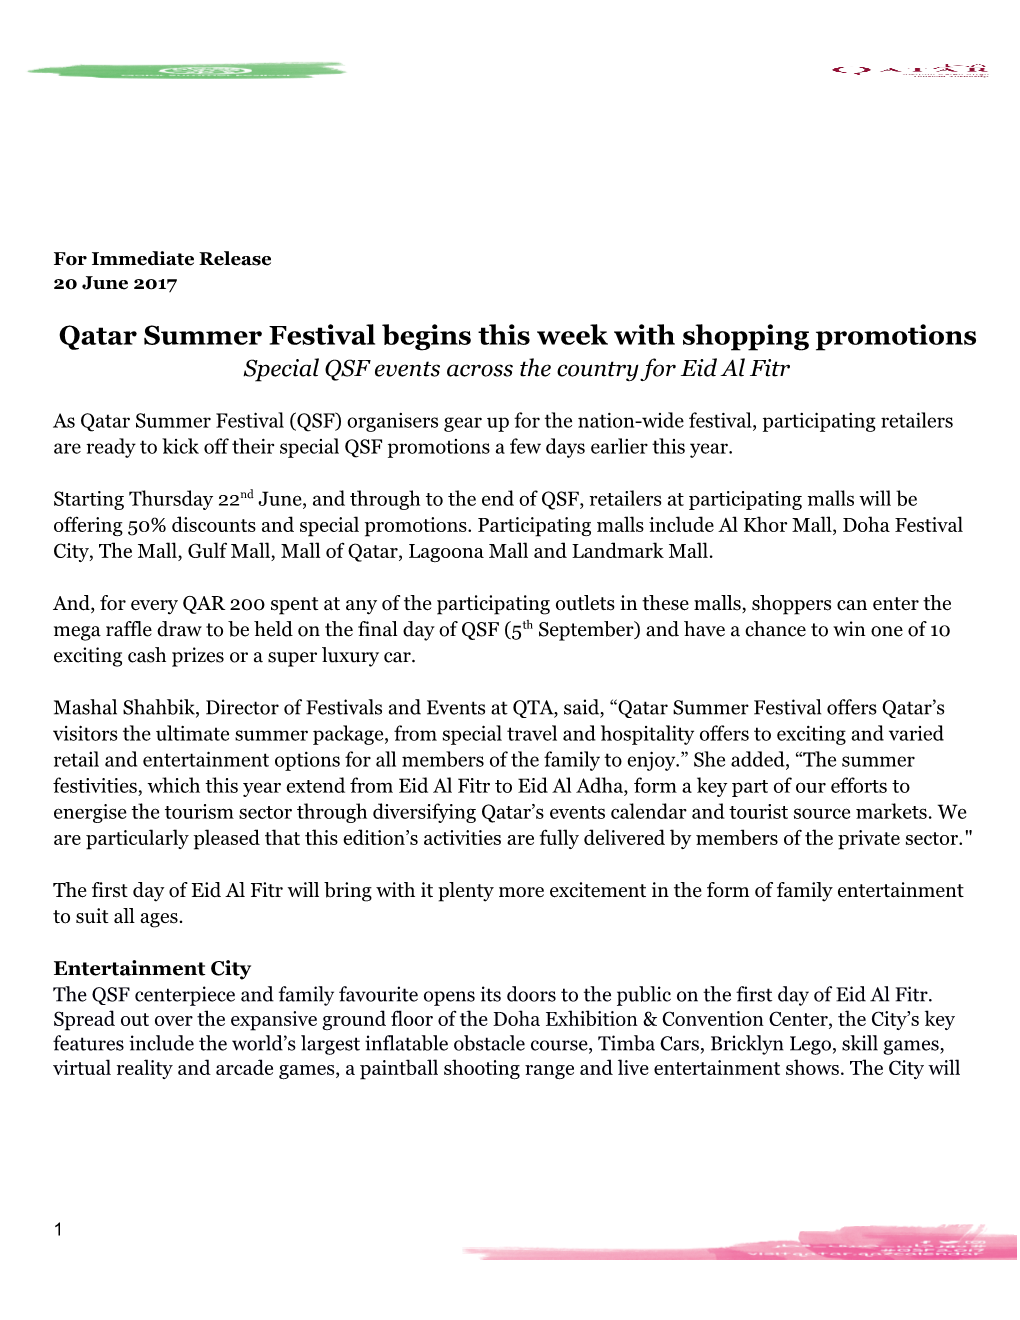 Qatar Summer Festival Begins This Week with Shopping Promotions